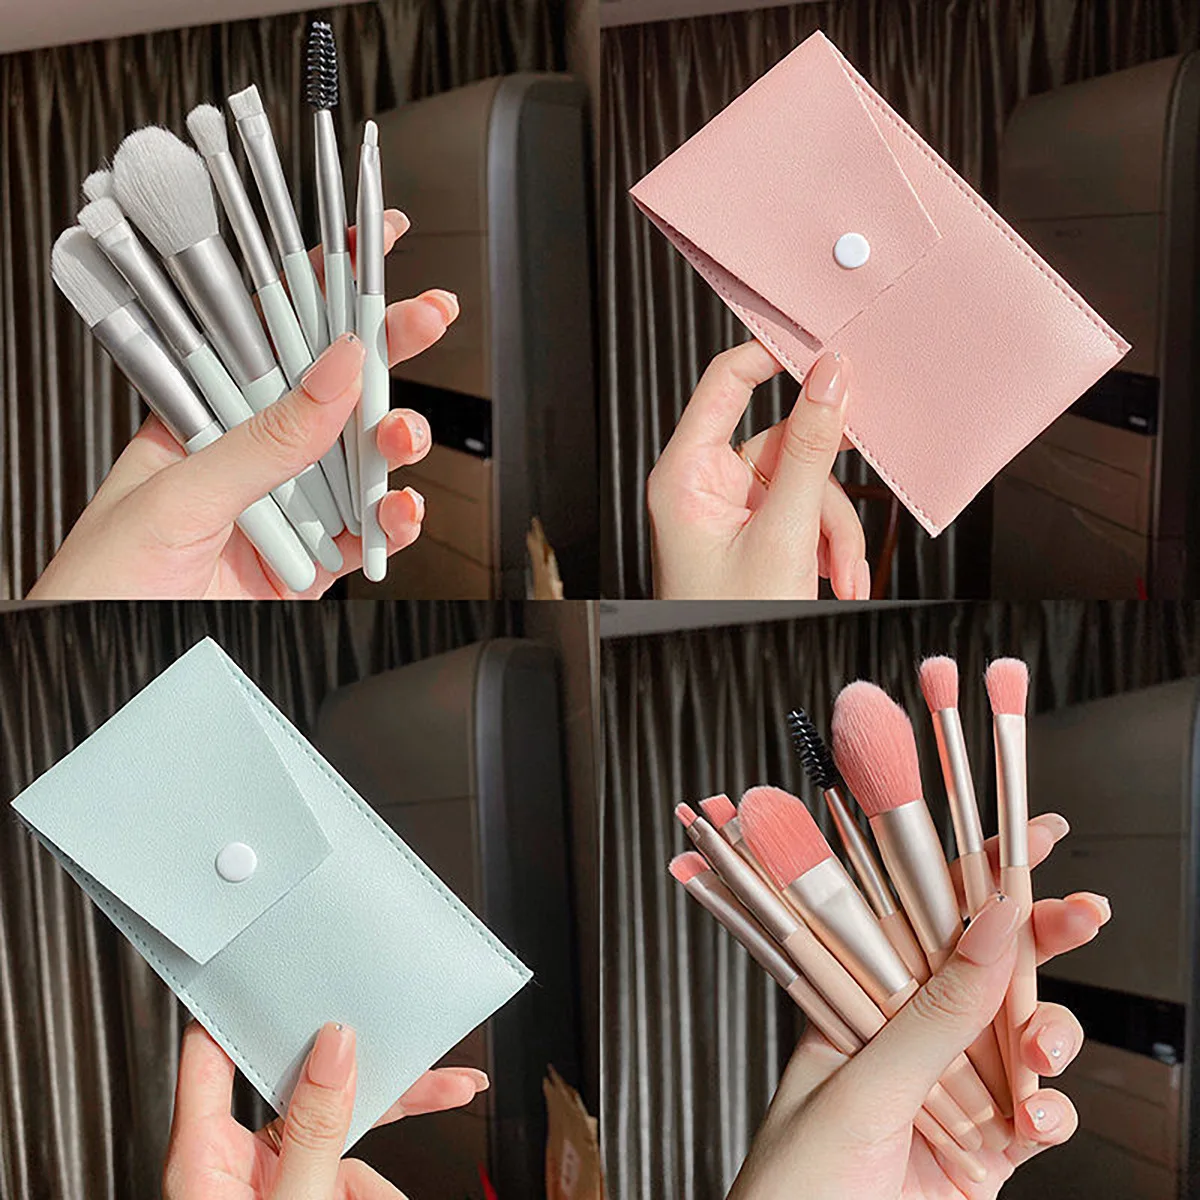 

New Arrival Soft Hair 8pcs Mini Micro Makeup Brushes Brushes Makeup Brochas De Maquillaje With Bag, Blue,pink,beige,apricot,light green